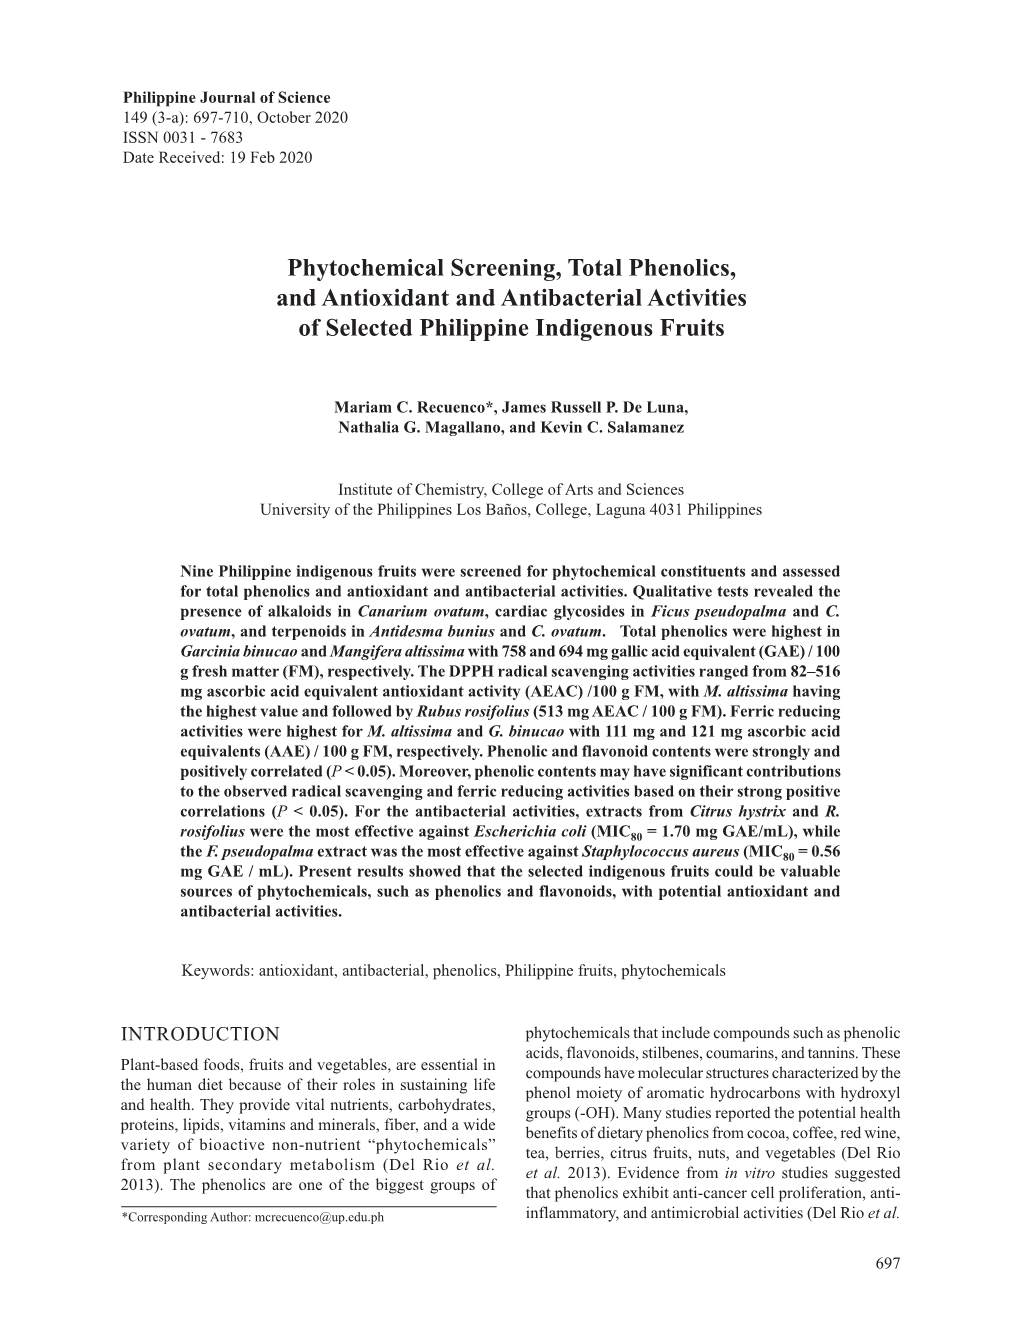 Phytochemical Screening, Total Phenolics, and Antioxidant and Antibacterial Activities of Selected Philippine Indigenous Fruits